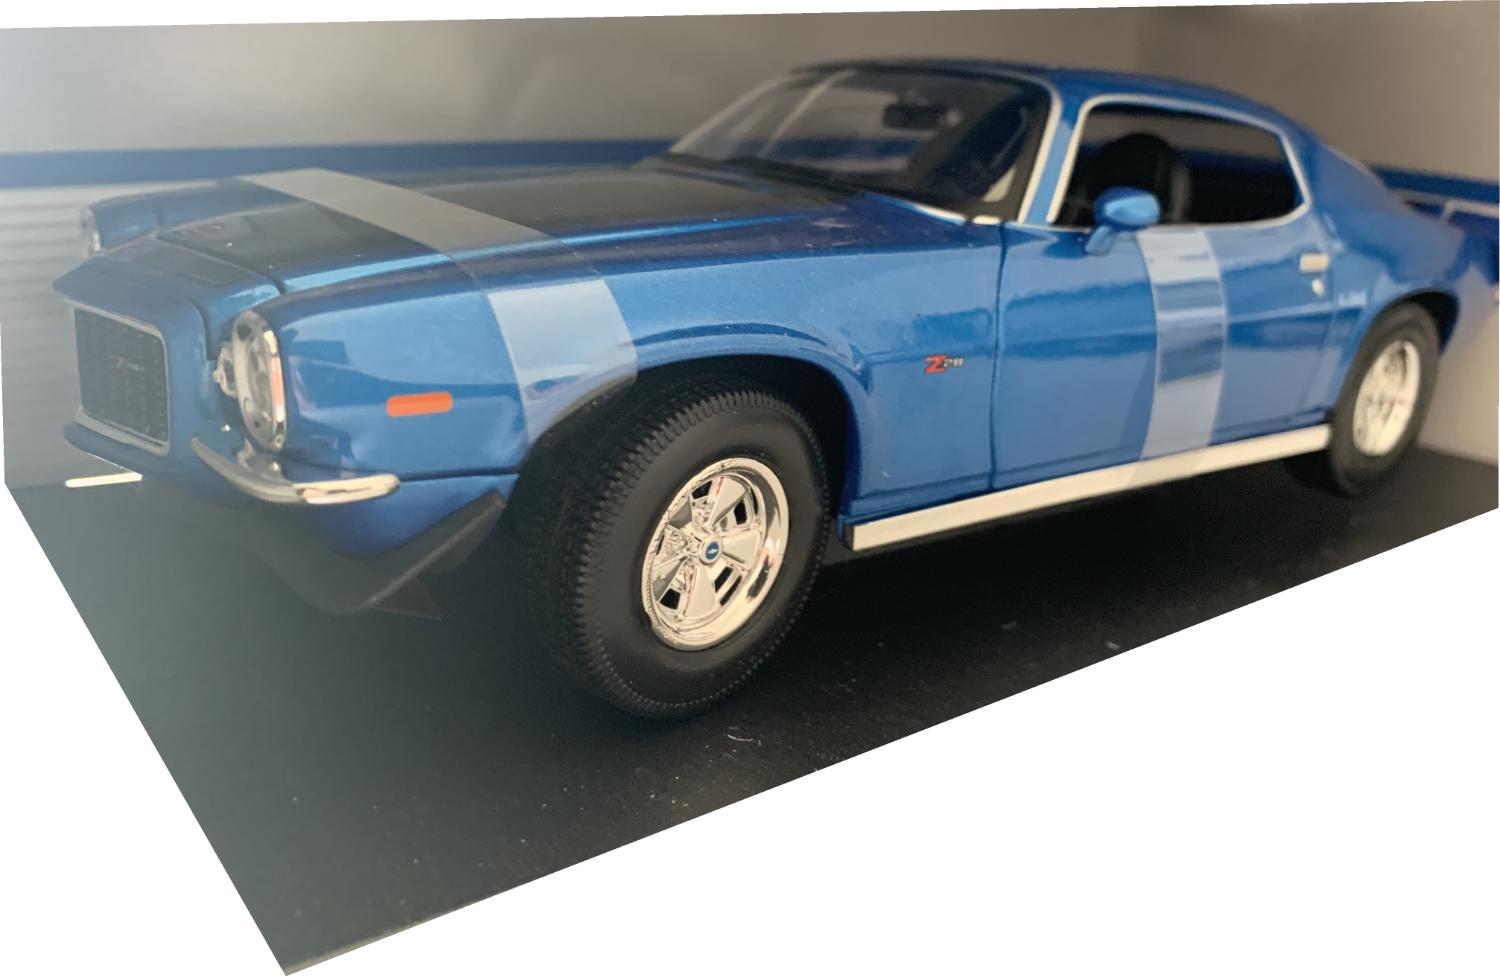 A very good representation of the Chevrolet Camaro Z/28 decorated in metallic blue with authentic black graphics, rear spoiler and chrome wheels.